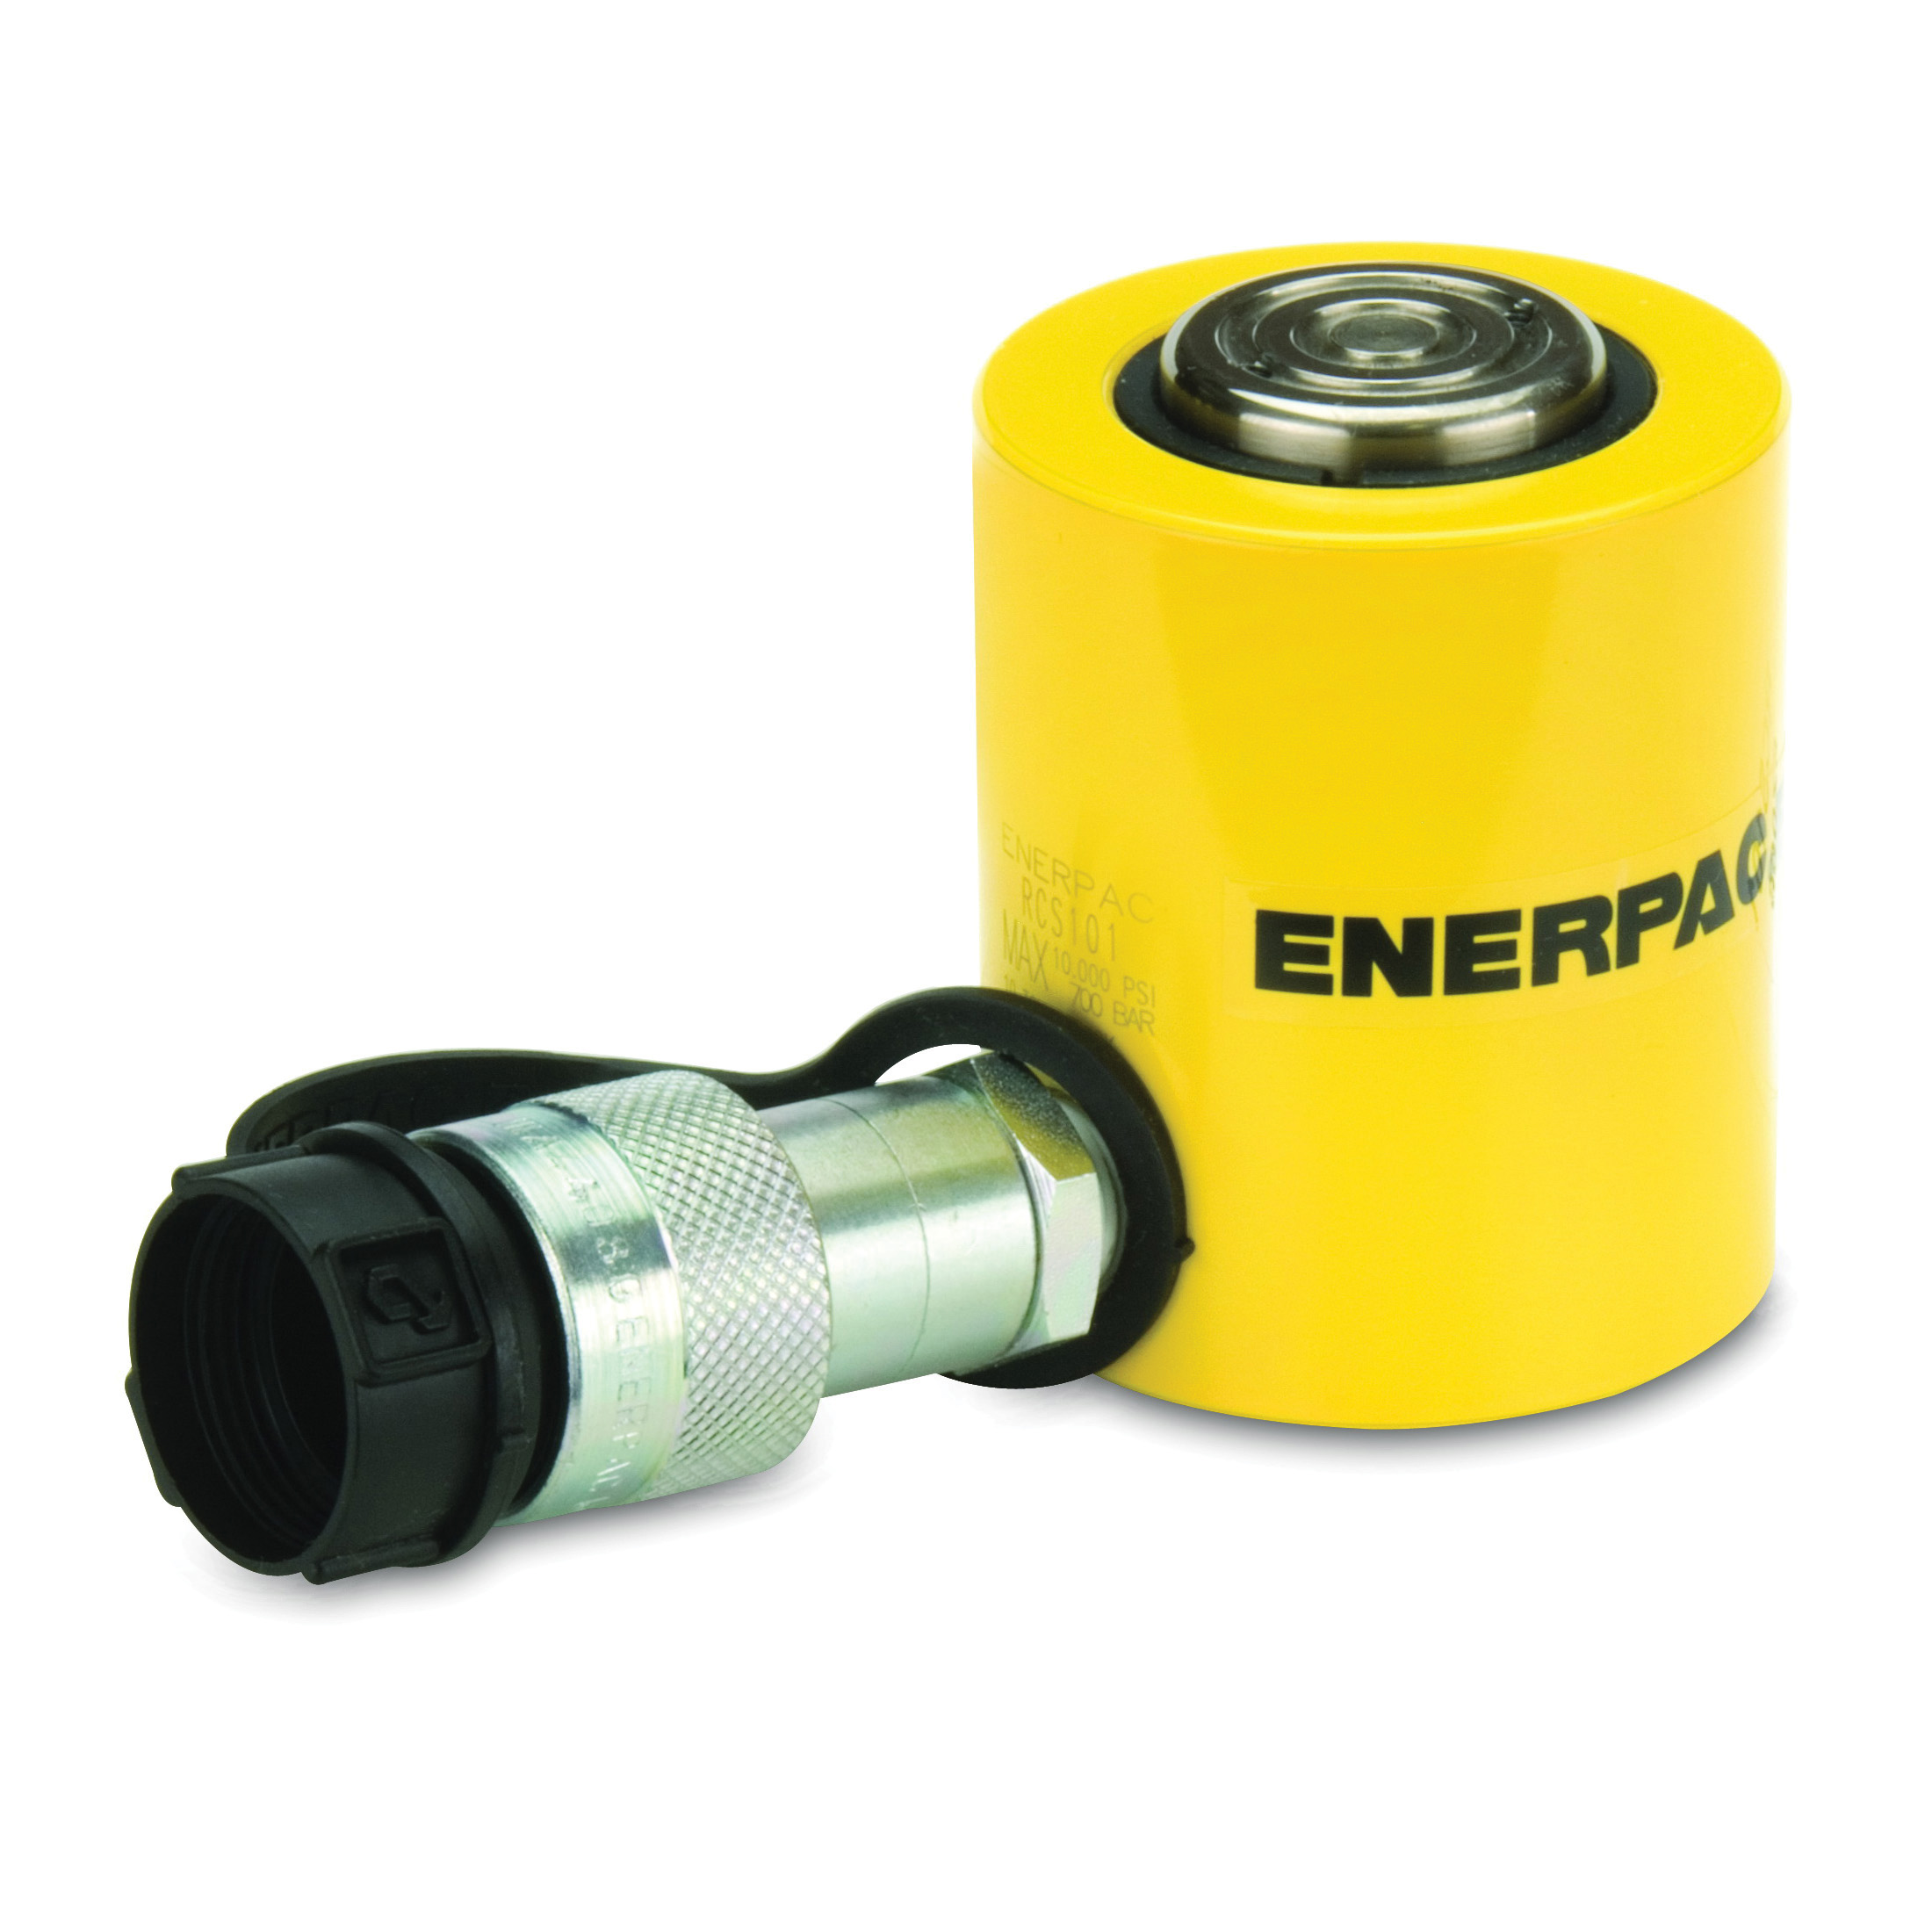 Enerpac® RC-154 DUO General Purpose Single Acting Hydraulic Cylinder, 15 ton Capacity, 2 in Dia Bore, 4 in L Stroke, 7.88 in H Retract, 1.63 in Dia Rod, 700 bar